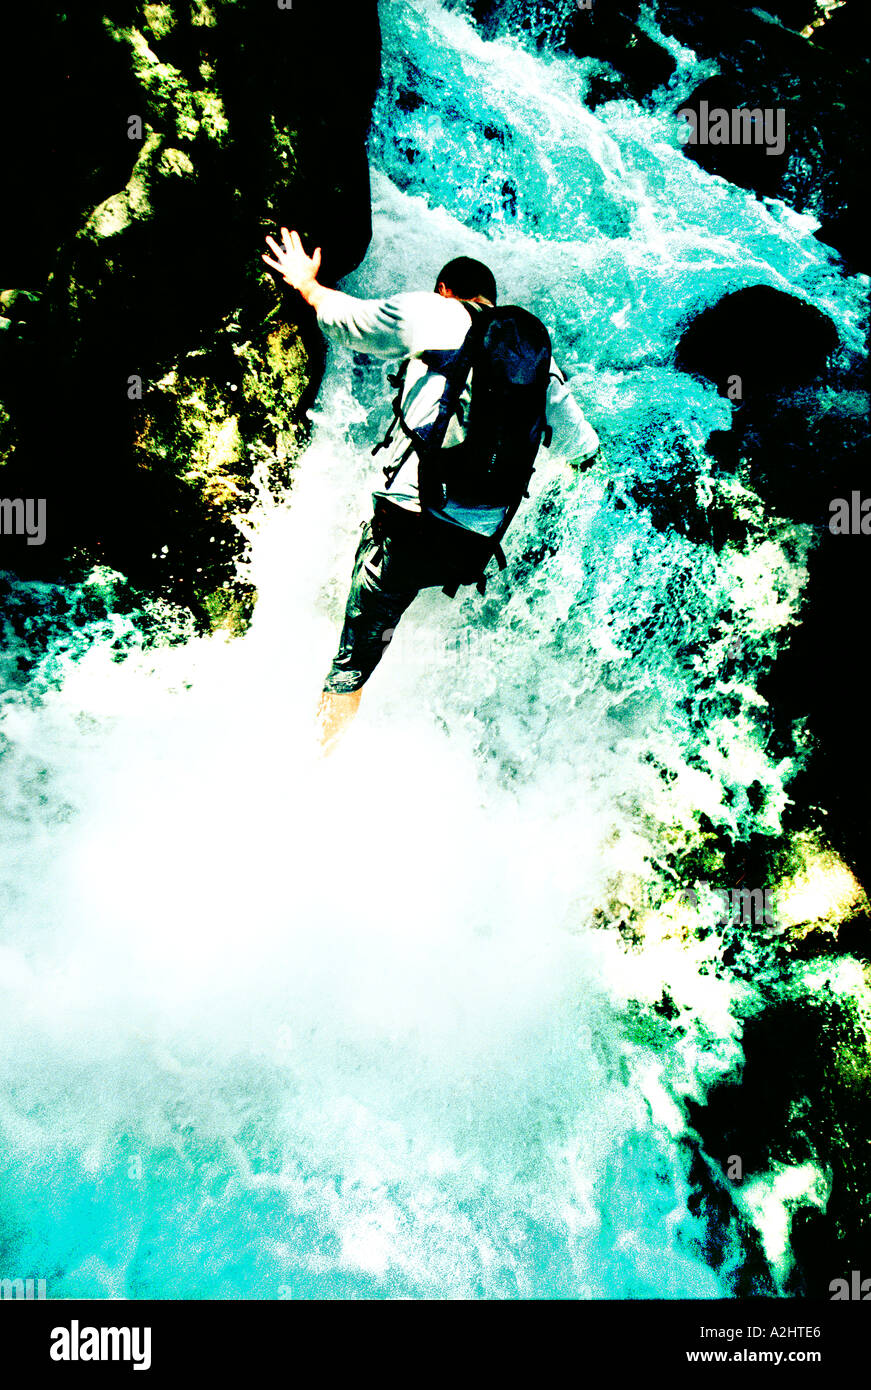 Male age 20-25 climbing a waterfall. The Image is in color and is portrait format. Stock Photo